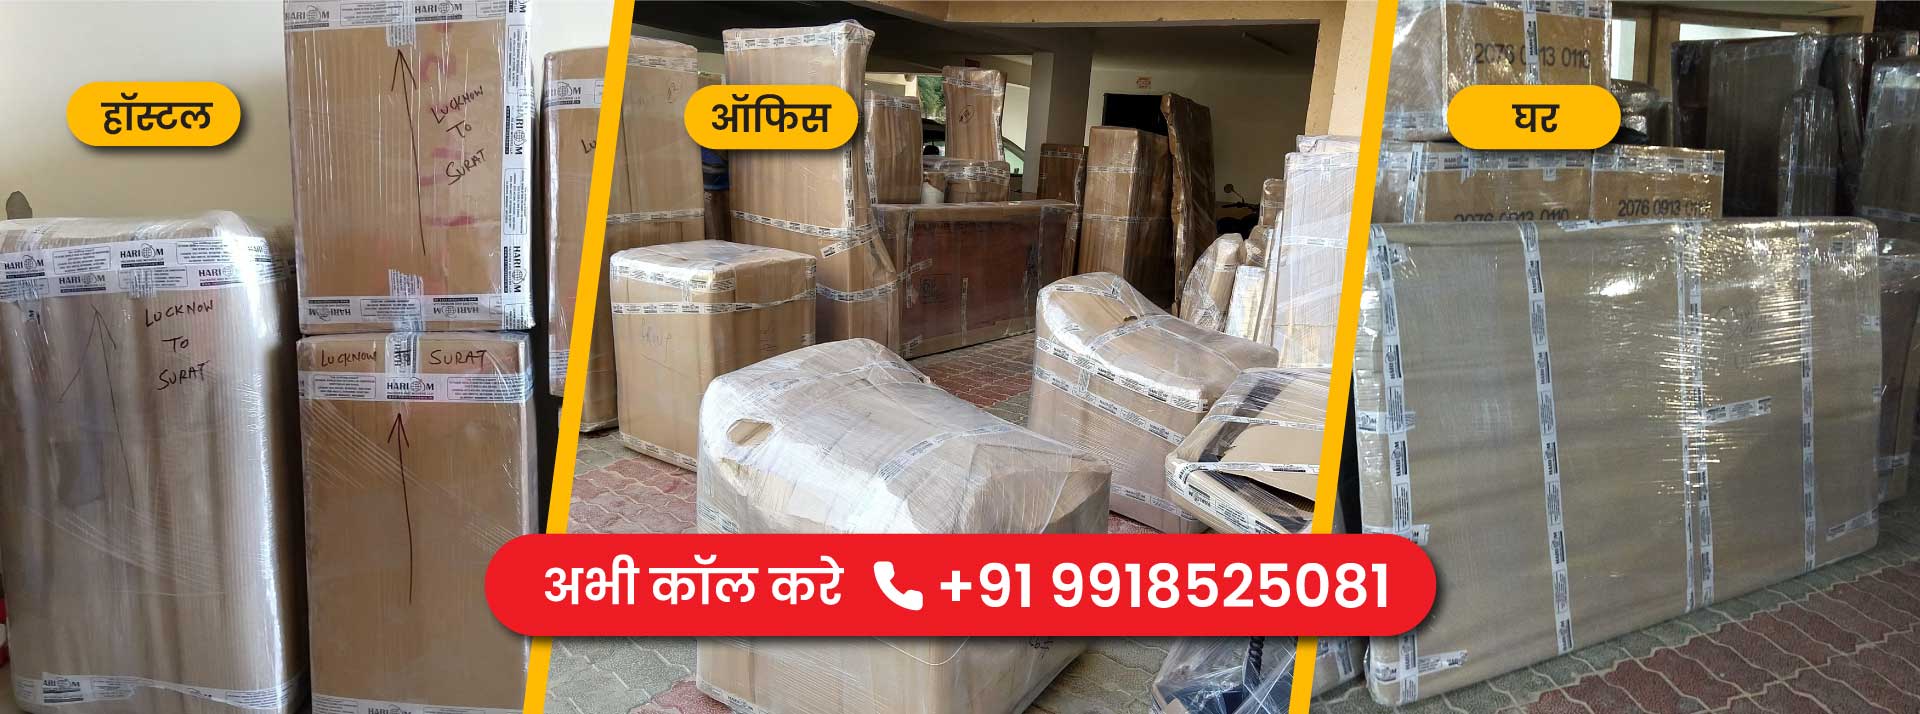 Movers and Packers Lucknow